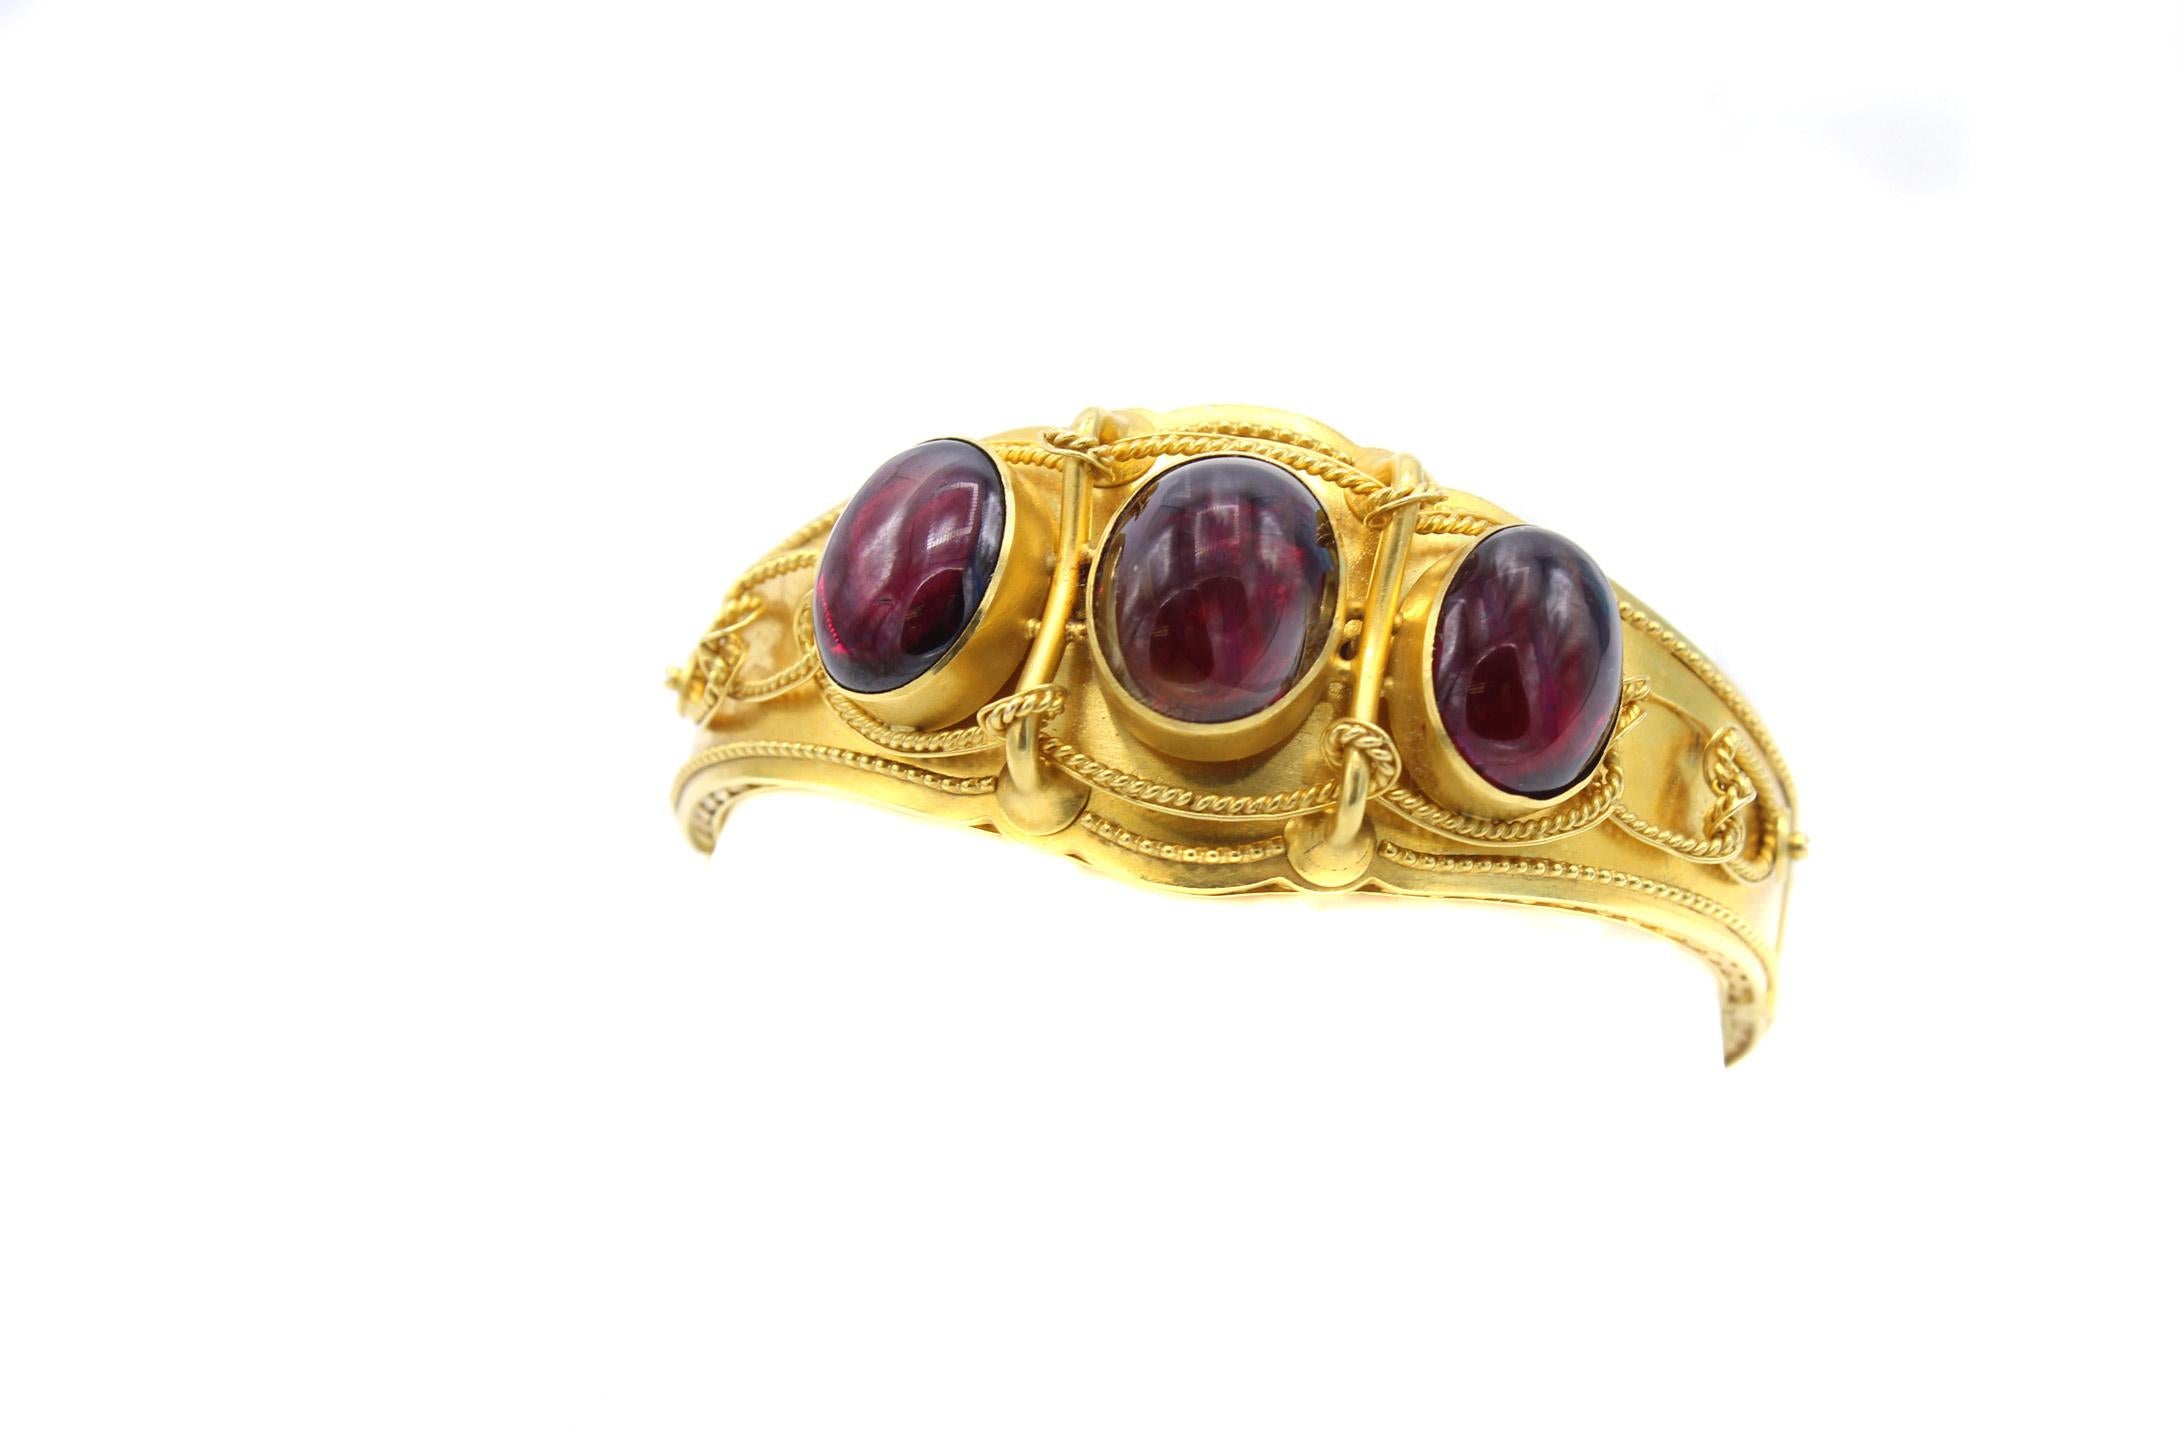 Beautifully designed and masterfully handcrafted, this Victorian gold bangle bracelet features 3 perfectly matched deep burgundy red cabochon garnets. The bangle is worked in a semi-polished gold with detailed braided gold work embellishing the